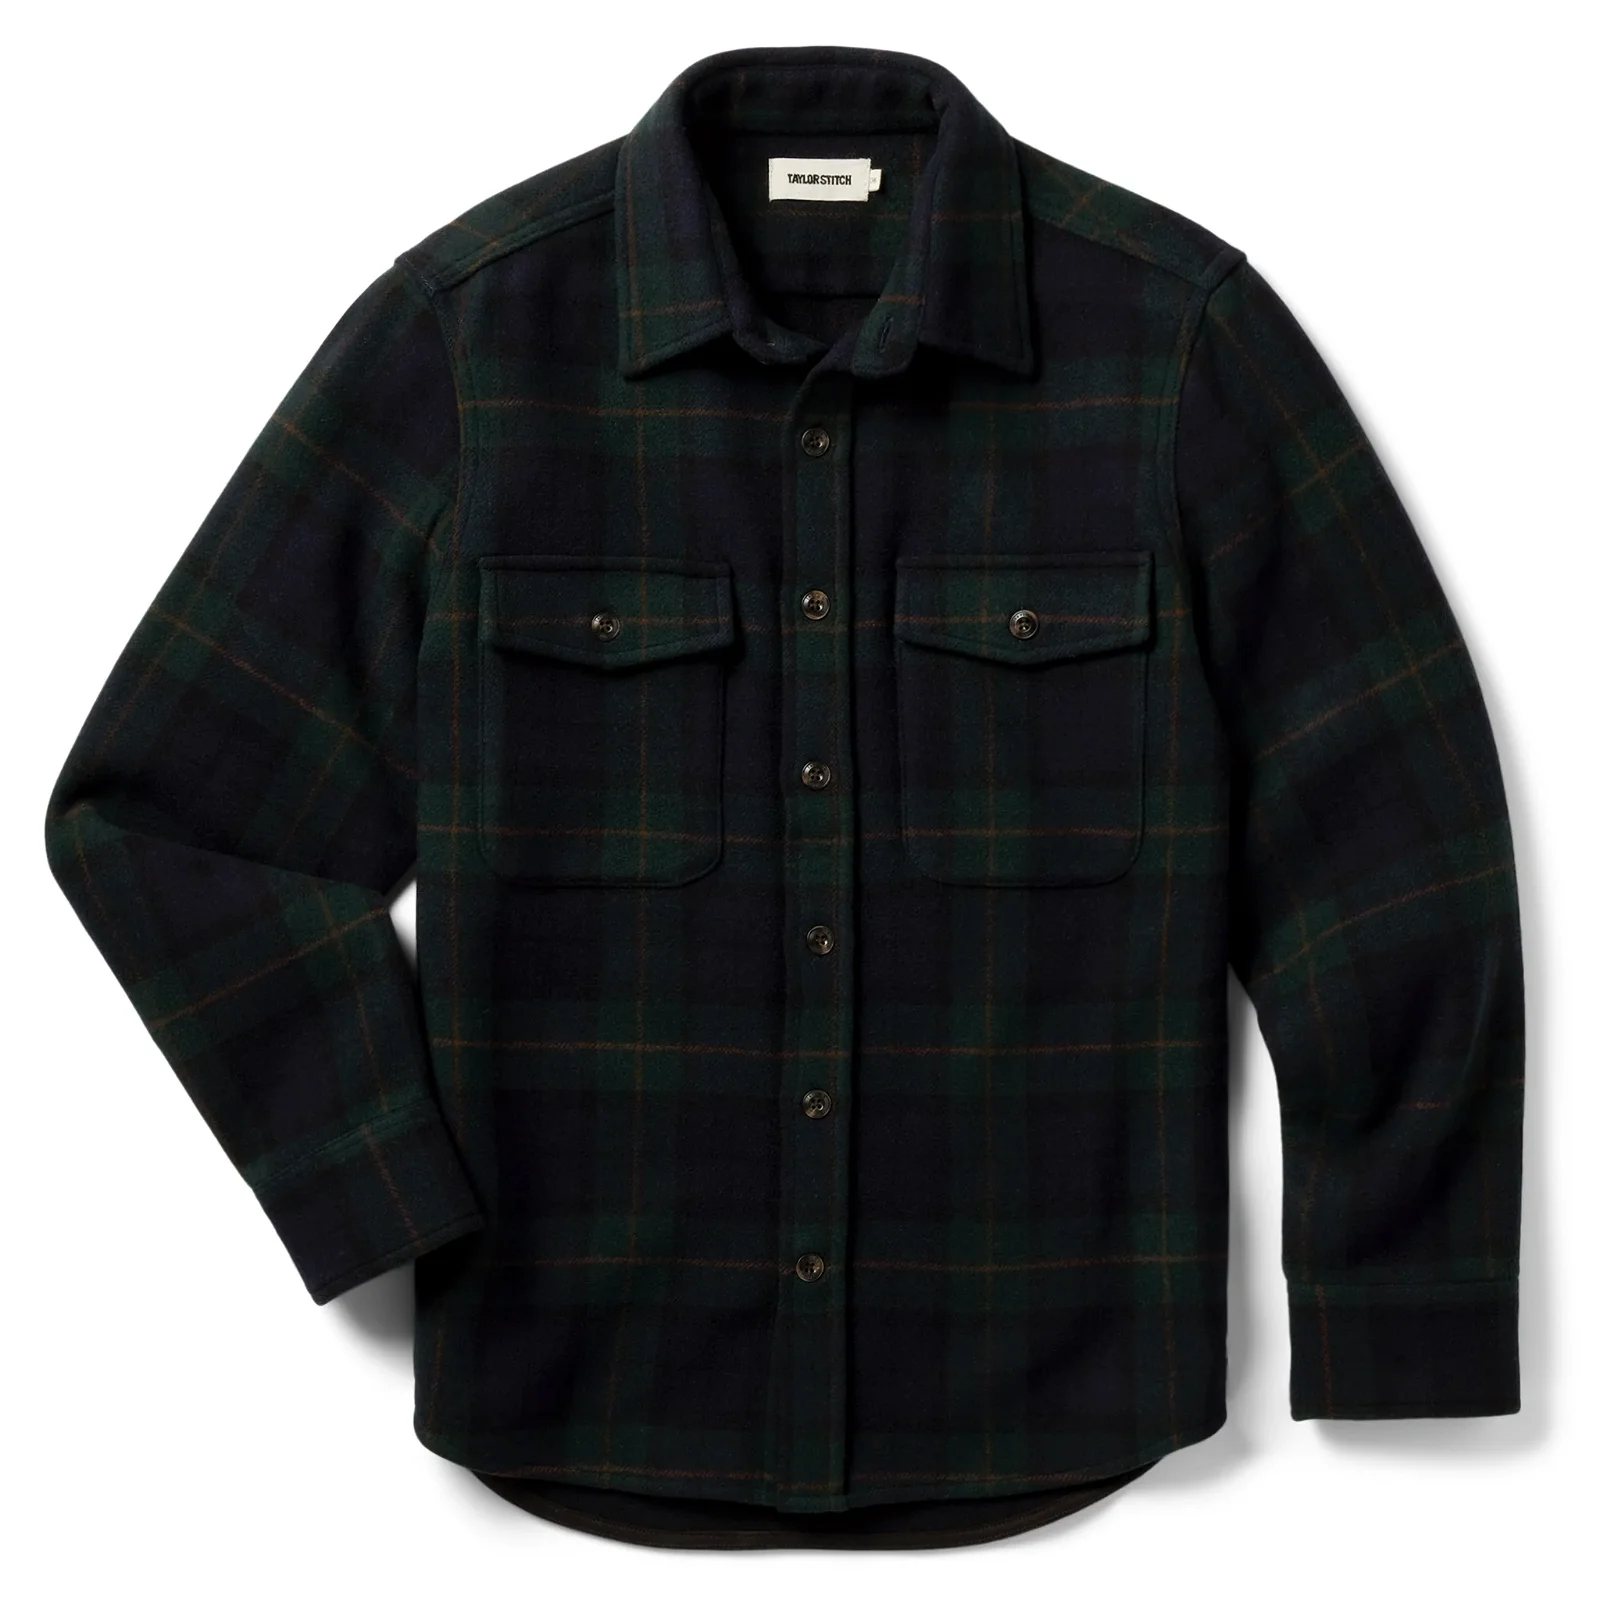 Image of The Maritime Shirt Jacket in Saltwater Plaid